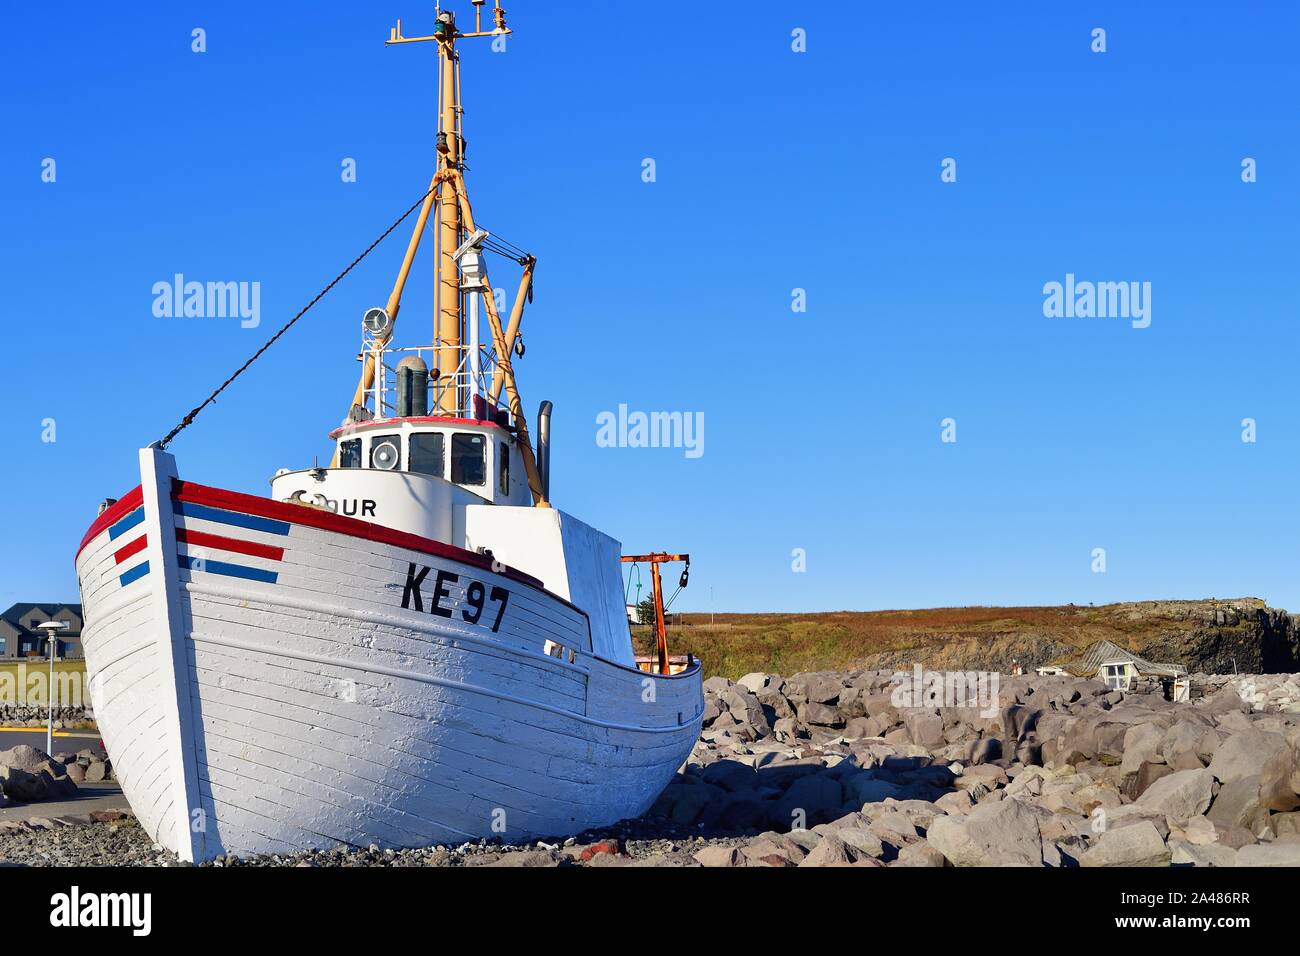 Reykjanesbaer, Iceland. A former fishing boat perched on a rock formation as a statue or monument at Reykjanesbaer. Stock Photo